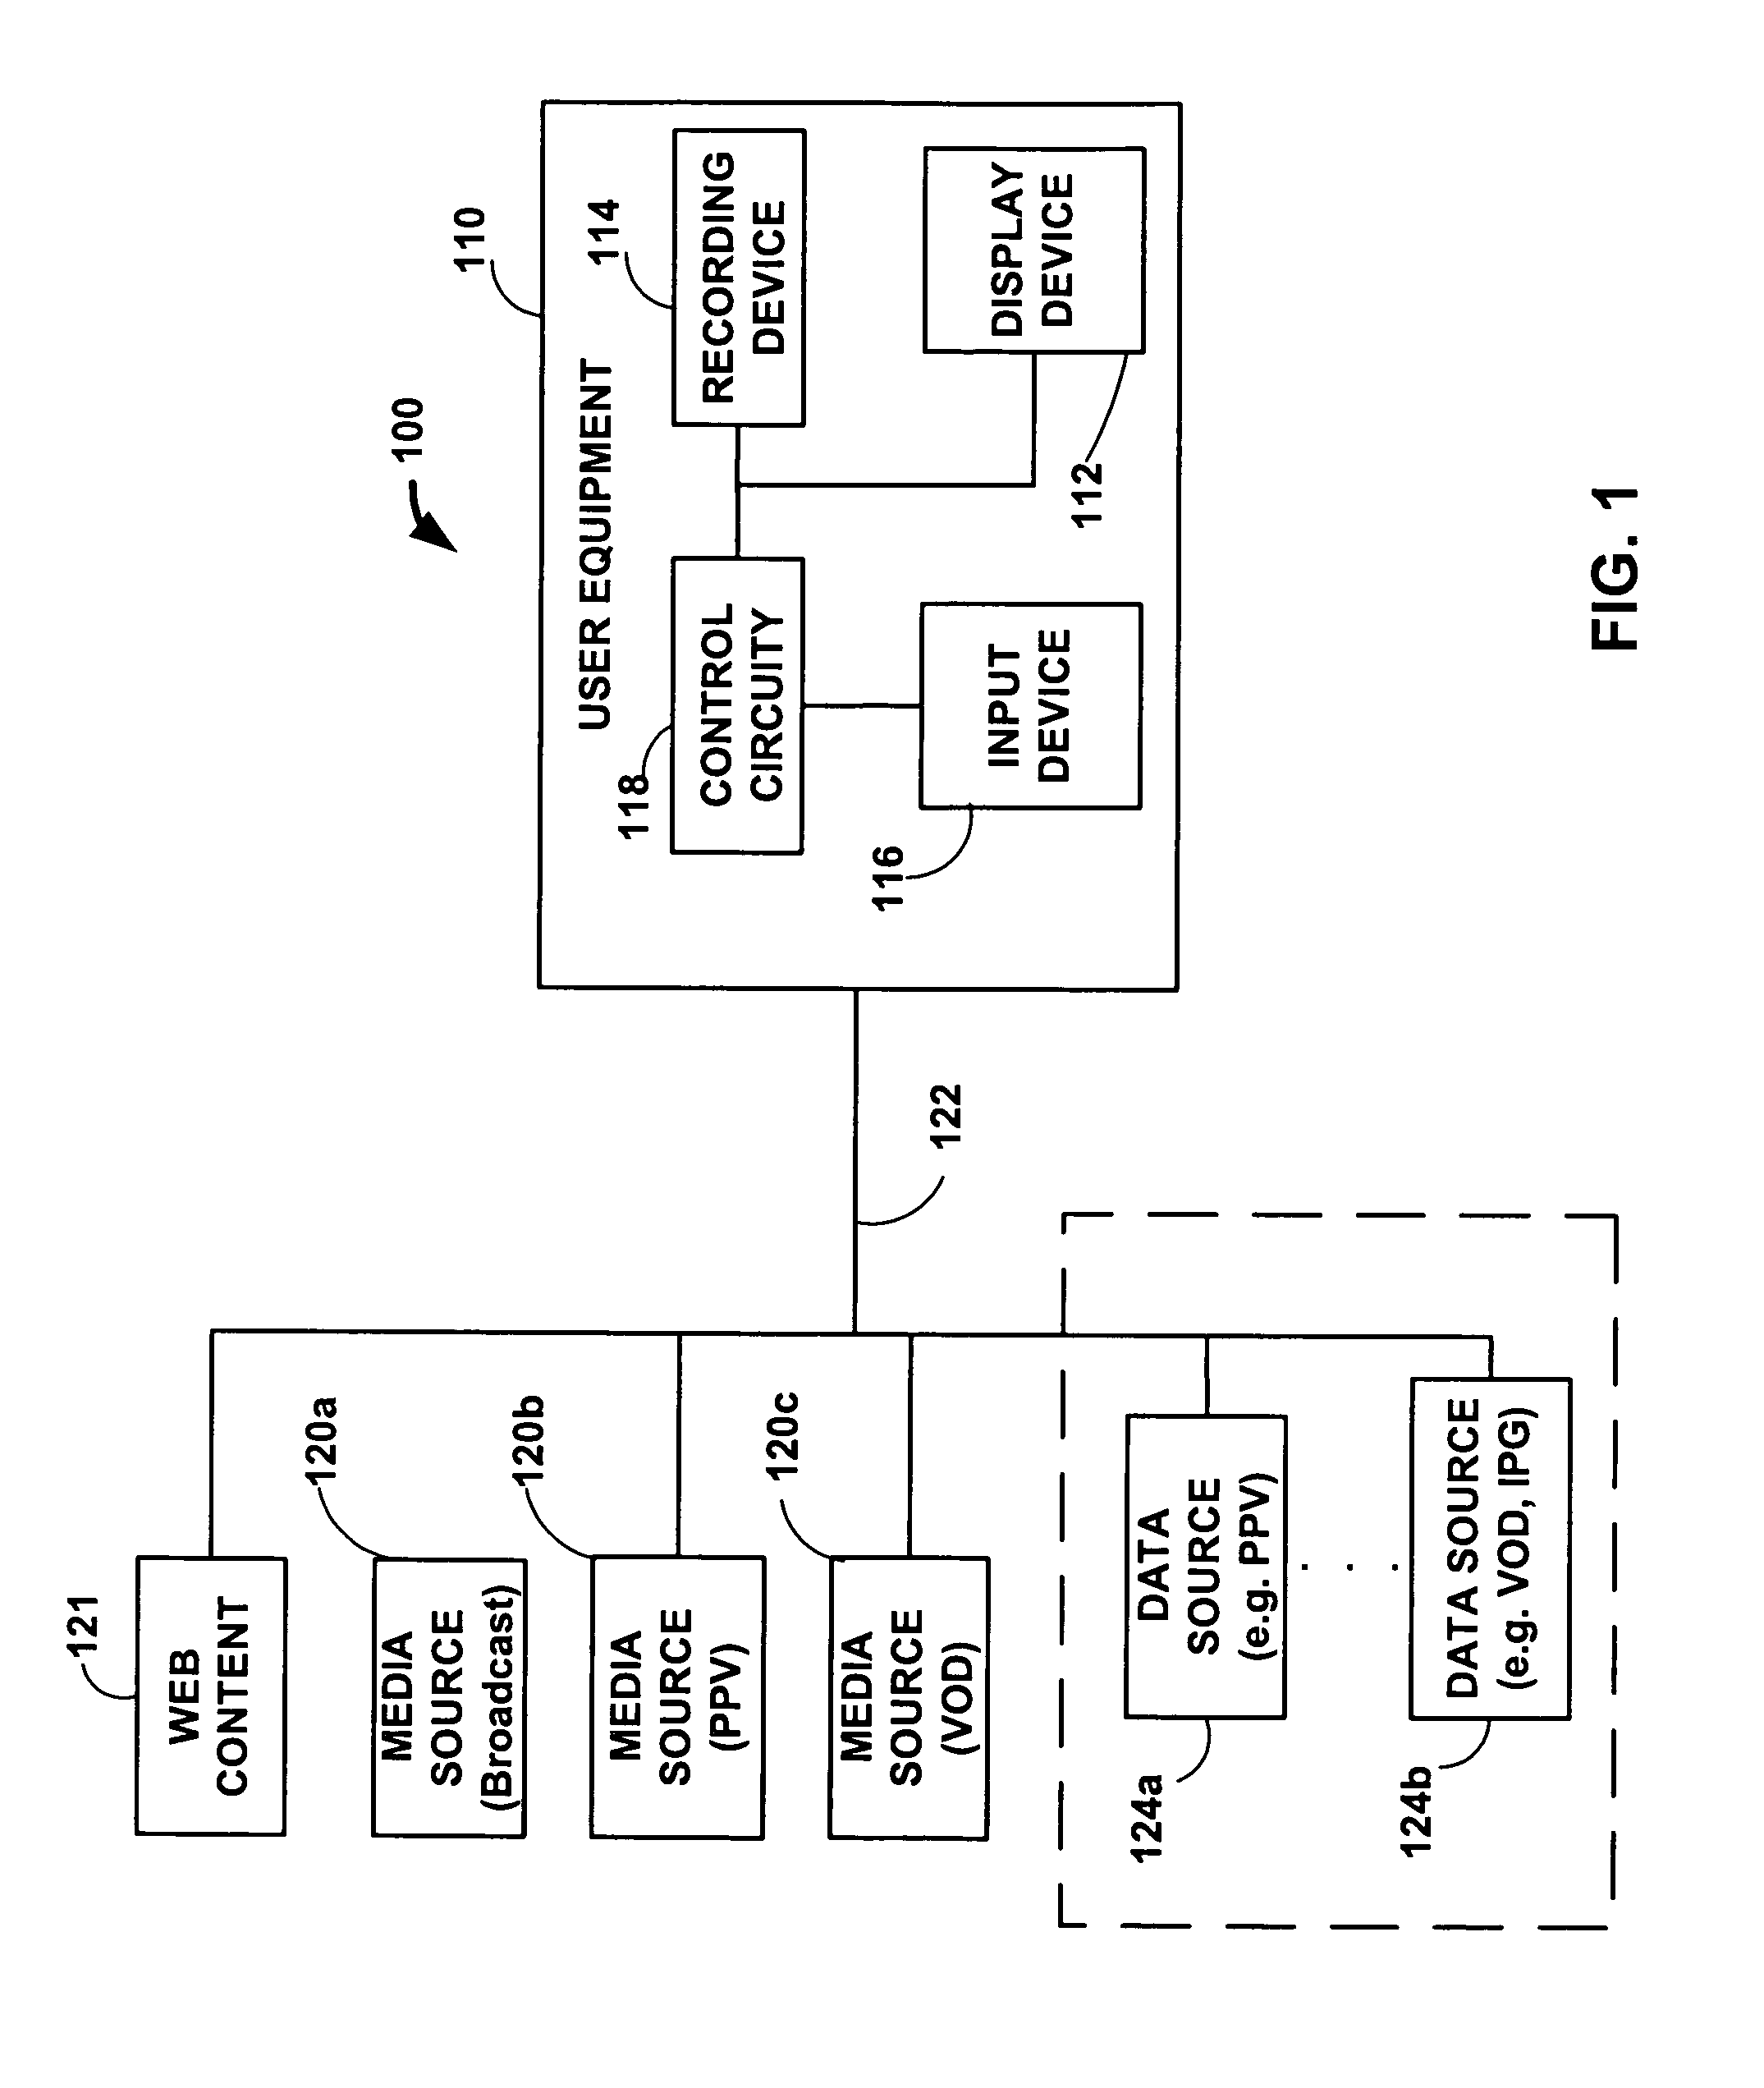 Systems and methods for resolving conflicts and managing system resources in multimedia delivery systems